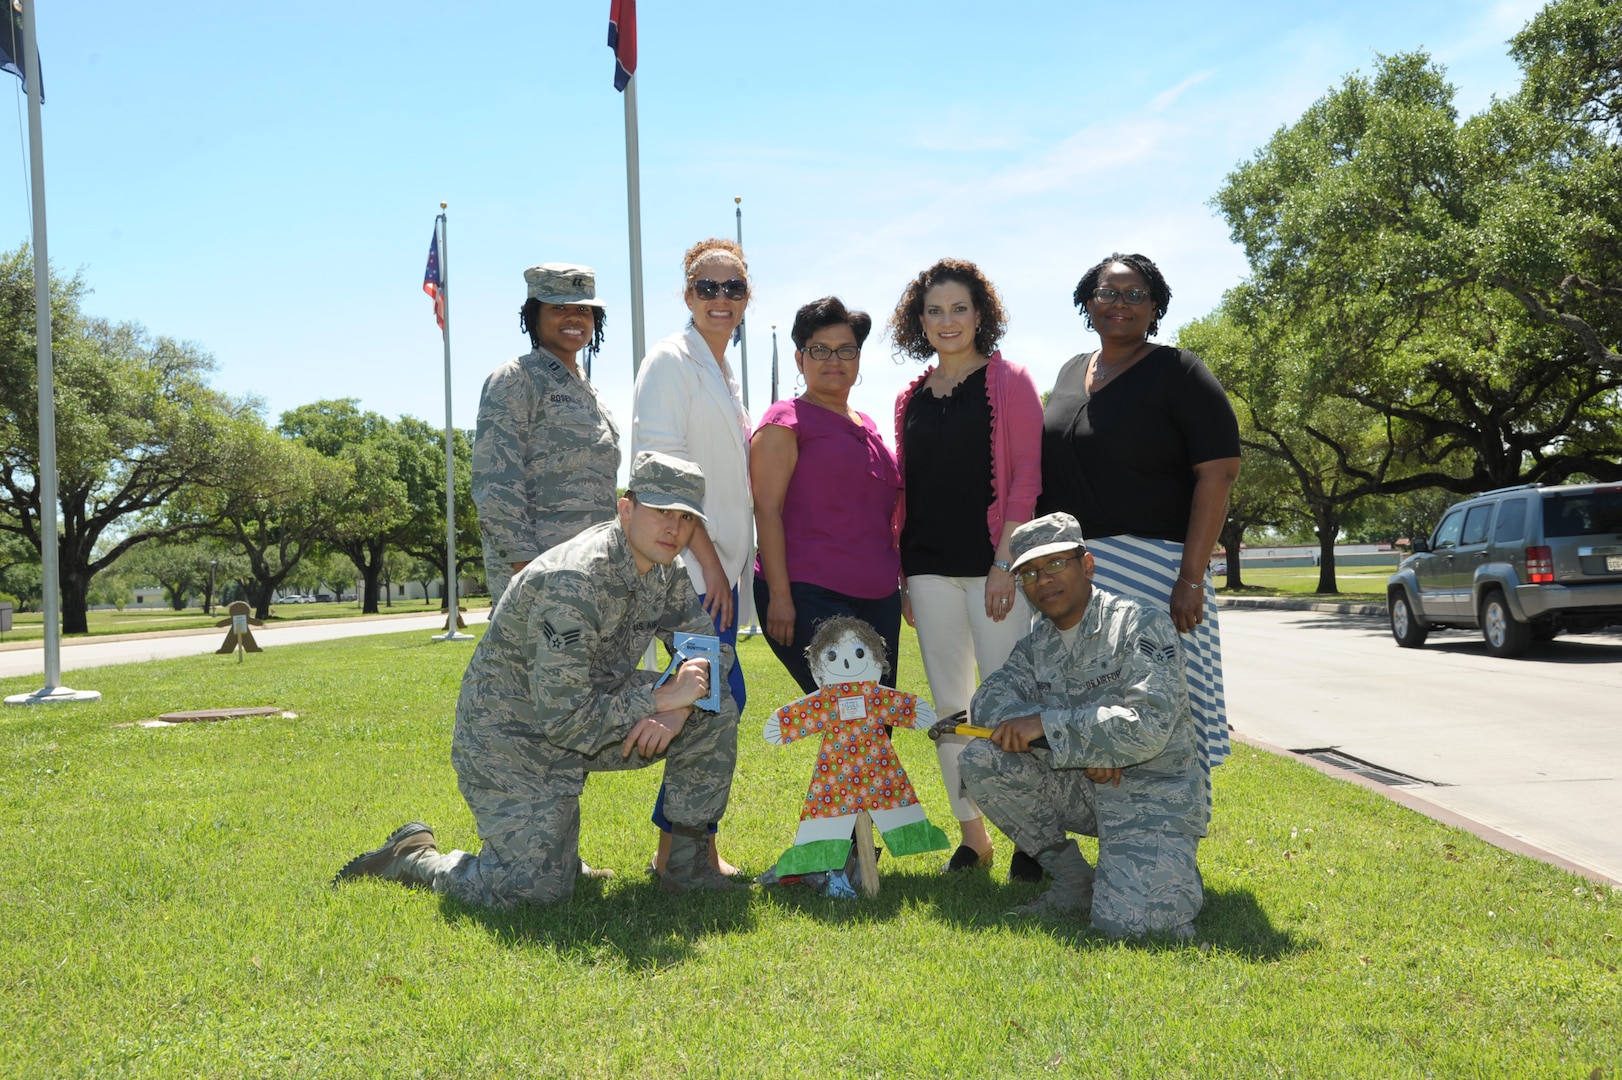 Members from the 359th Medical Operations Group, Family Advocacy program place Cardboard Kid cut-outs at Joint Base San Antonio-Randolph, April 6, 2017 in support for Child Abuse Prevention Month. Cardboard Kid cut-outs will be displayed throughout JBSA during the month of April.